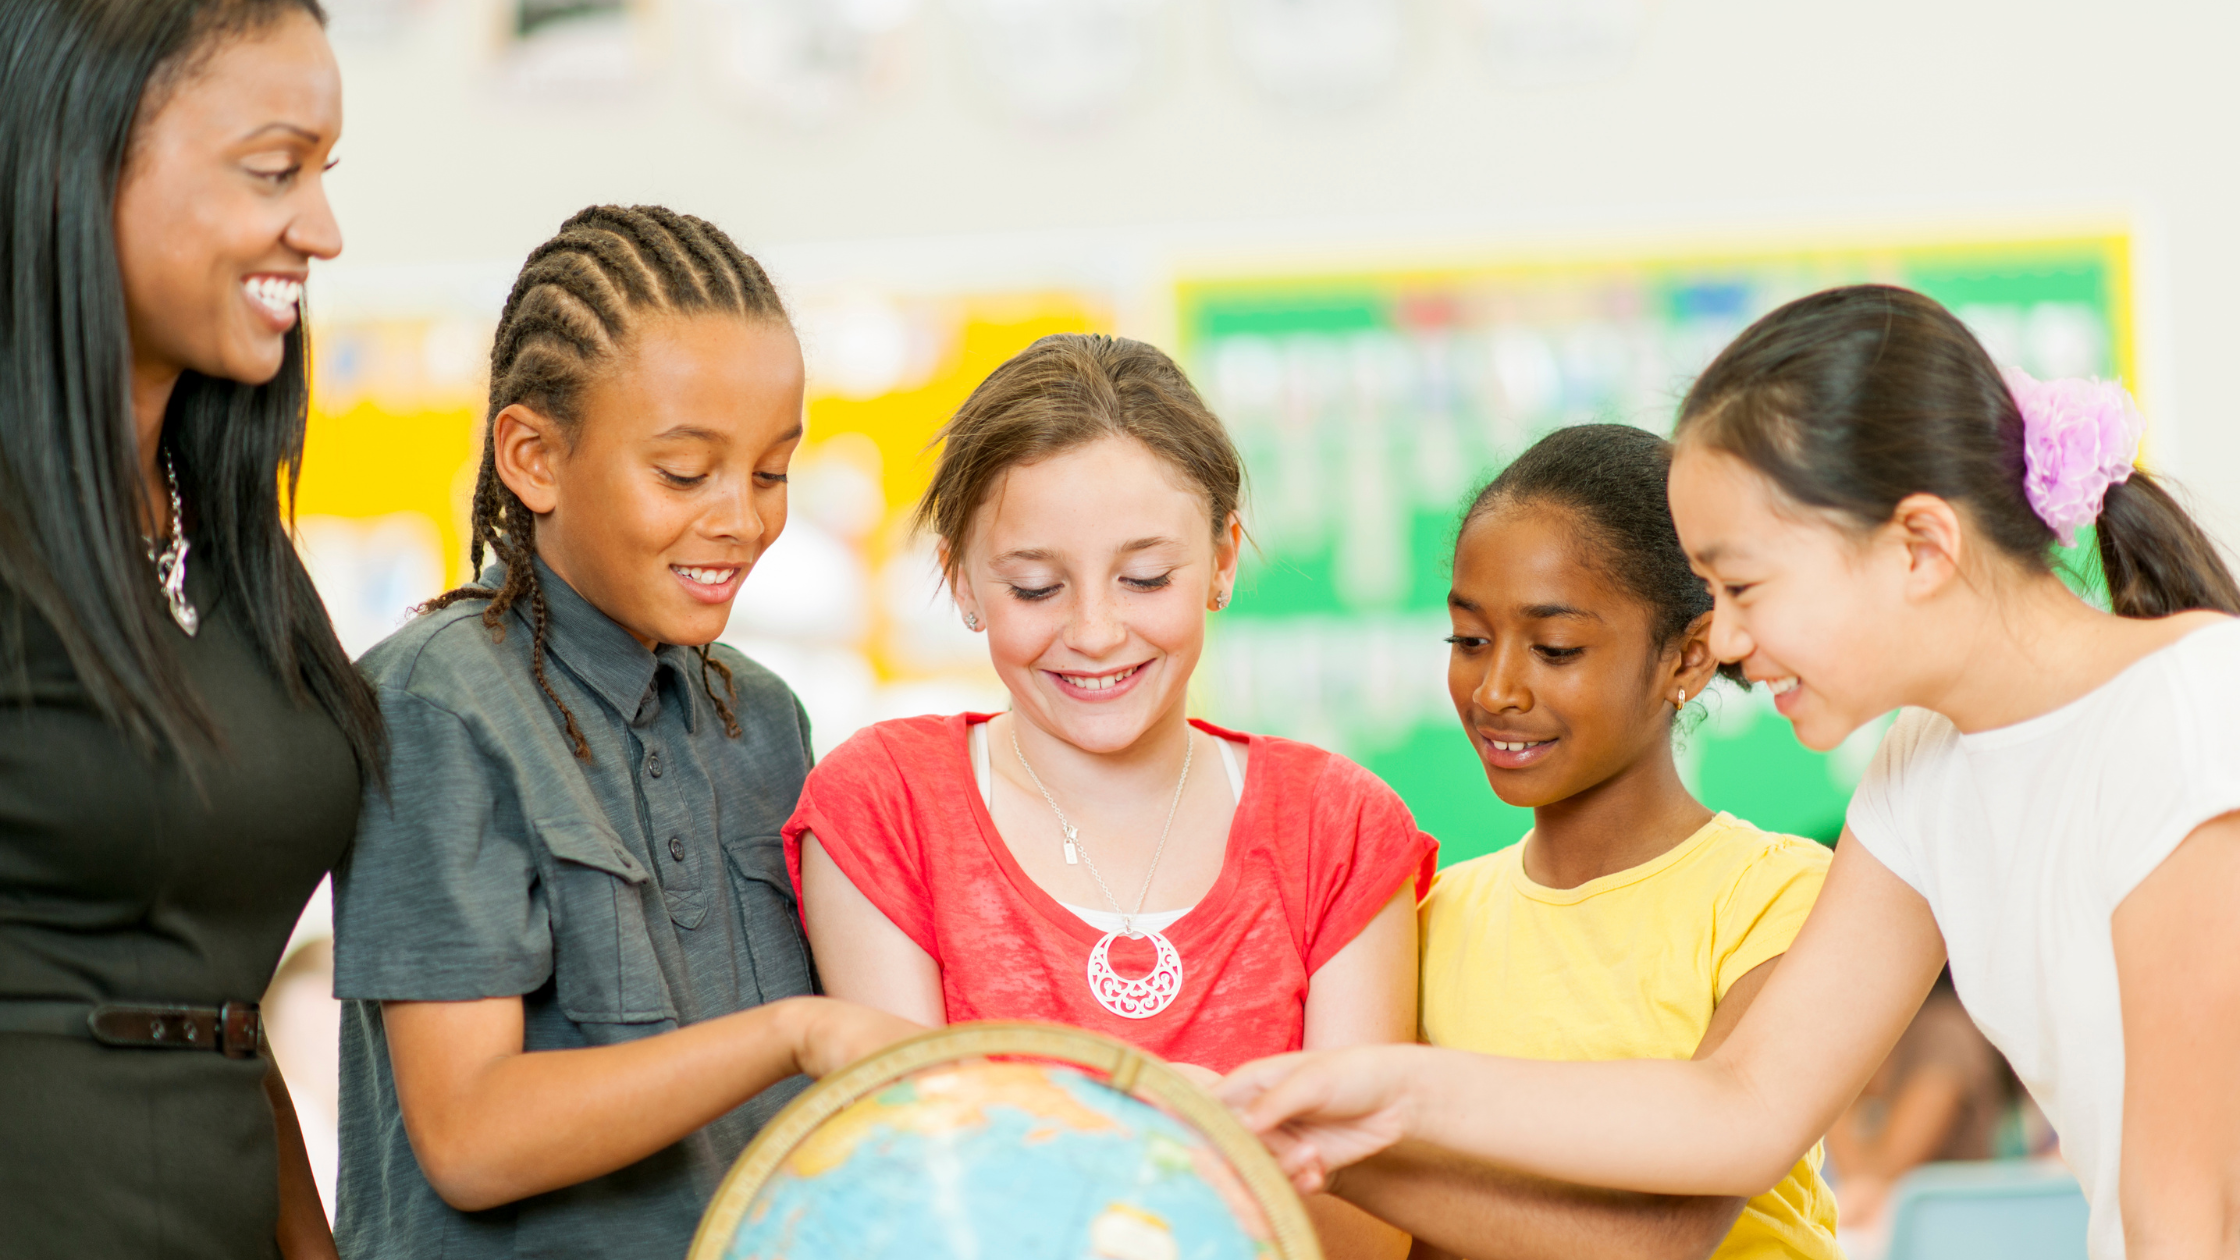 How to Create an Inclusive Classroom: 12 Tips for Teachers